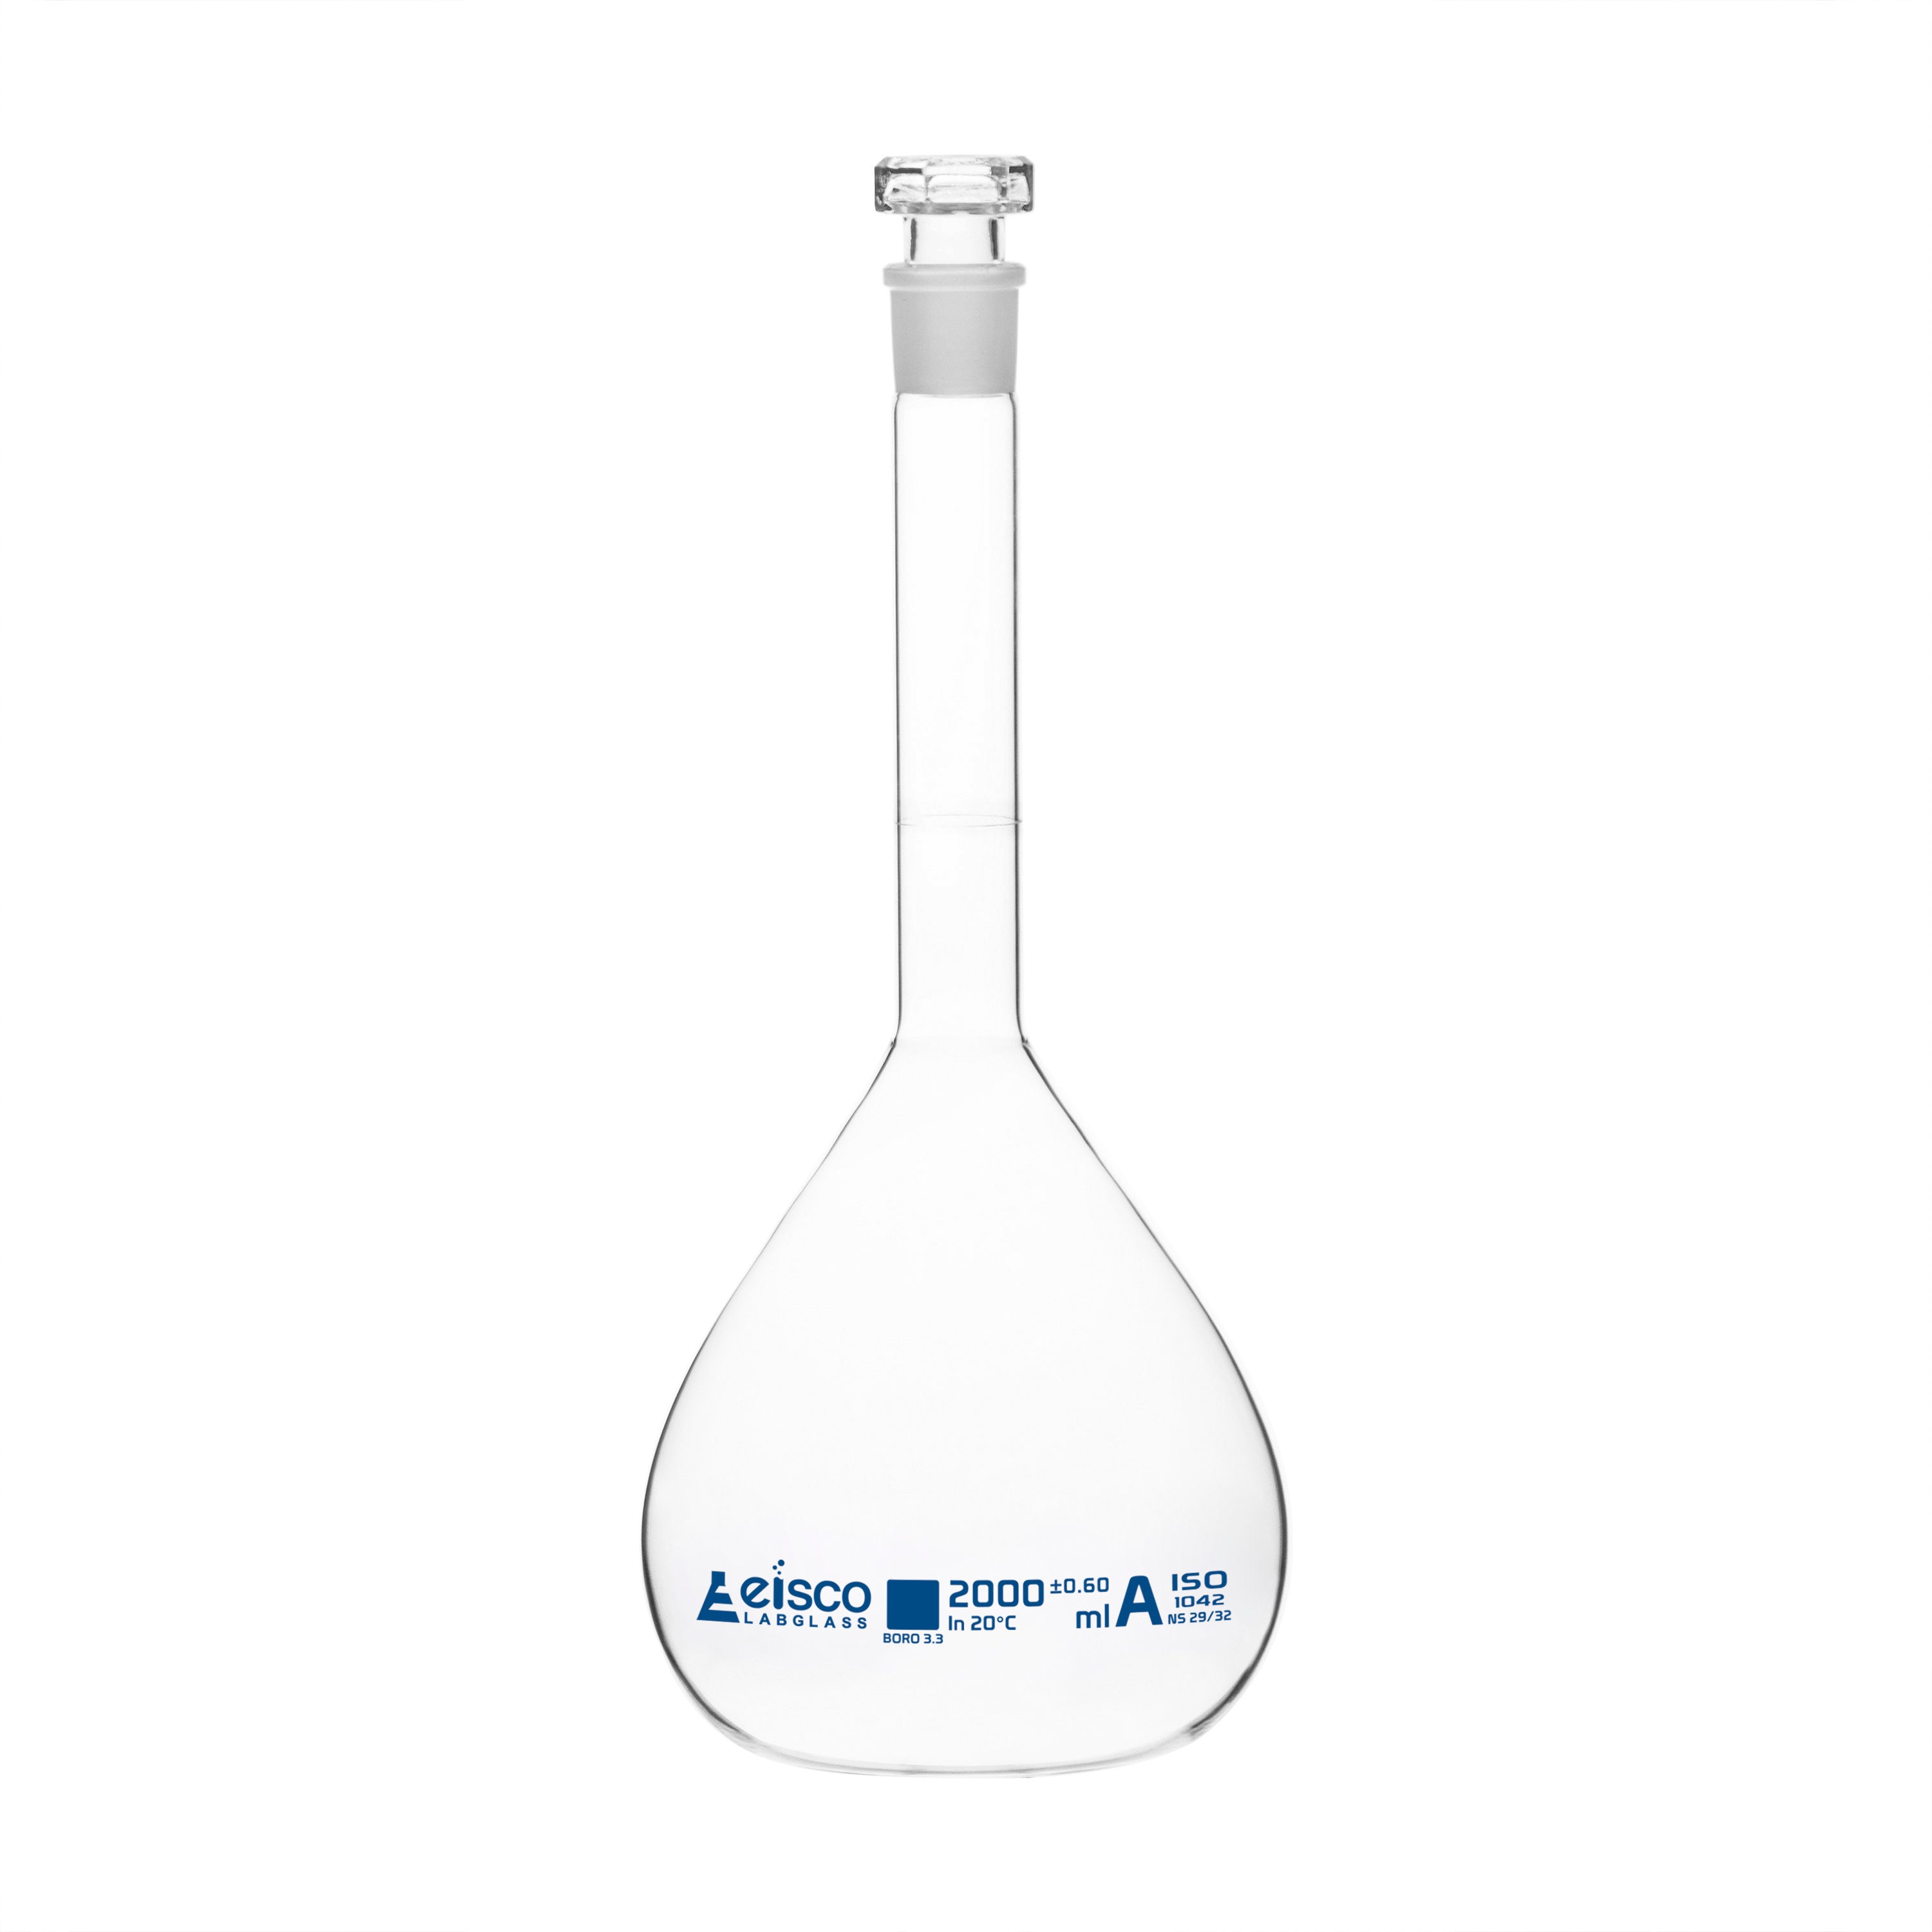 Borosilicate Volumetric Flask with Hollow Glass Stopper, 2000ml, Class A, Blue Print, Autoclavable